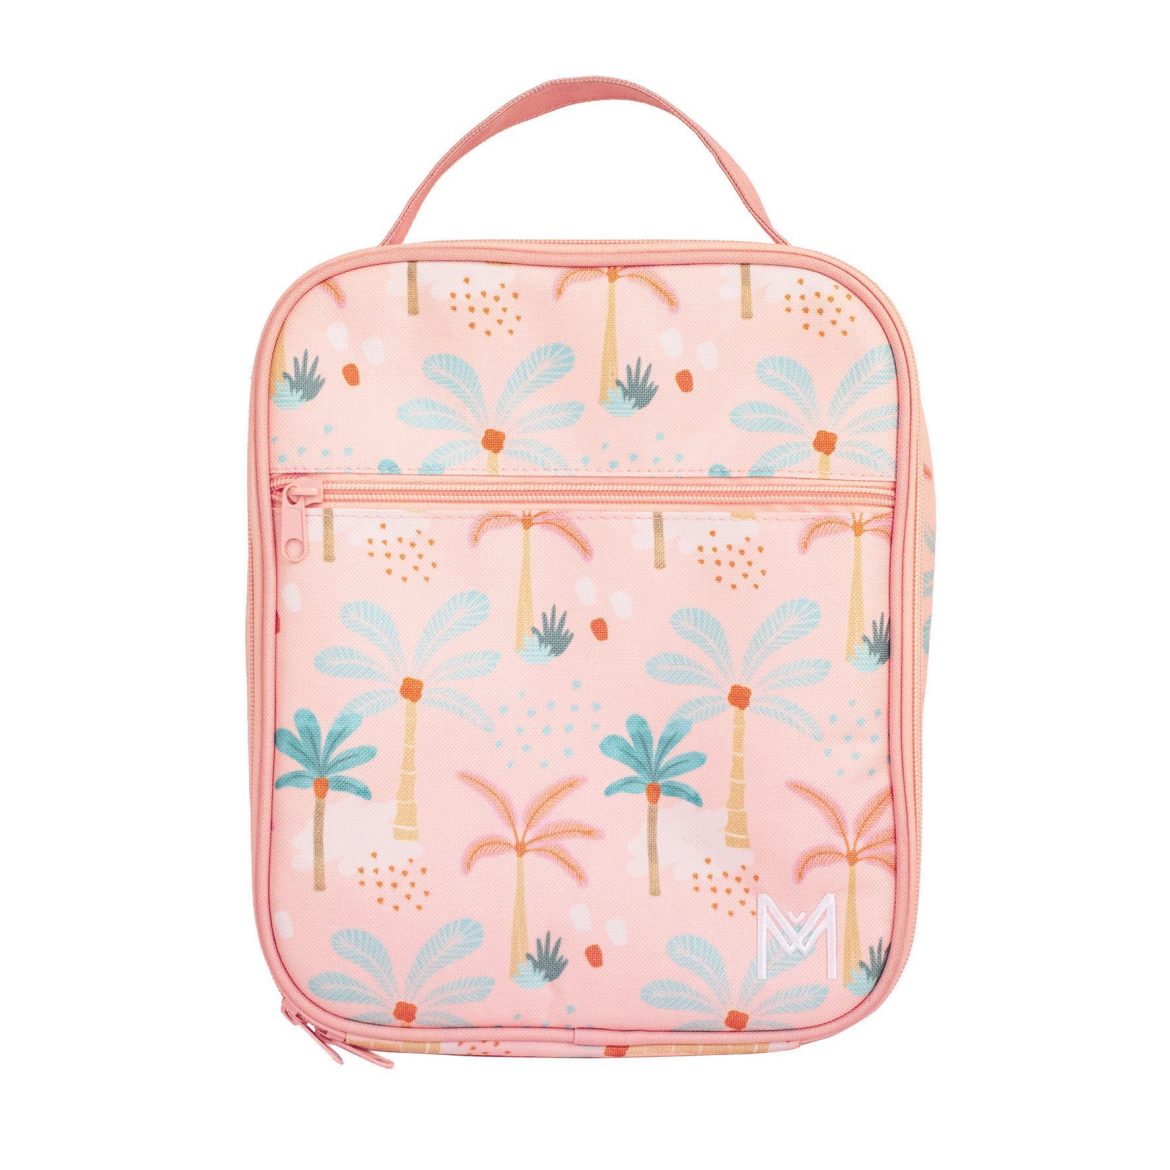 https://theorganisedhousewife.com.au/wp-content/uploads/2021/12/MontiiCo-Insulated-Lunch-Bag-Ice-Pack-Boho-W-MO-ILBPAL-4-1170x1170.jpeg